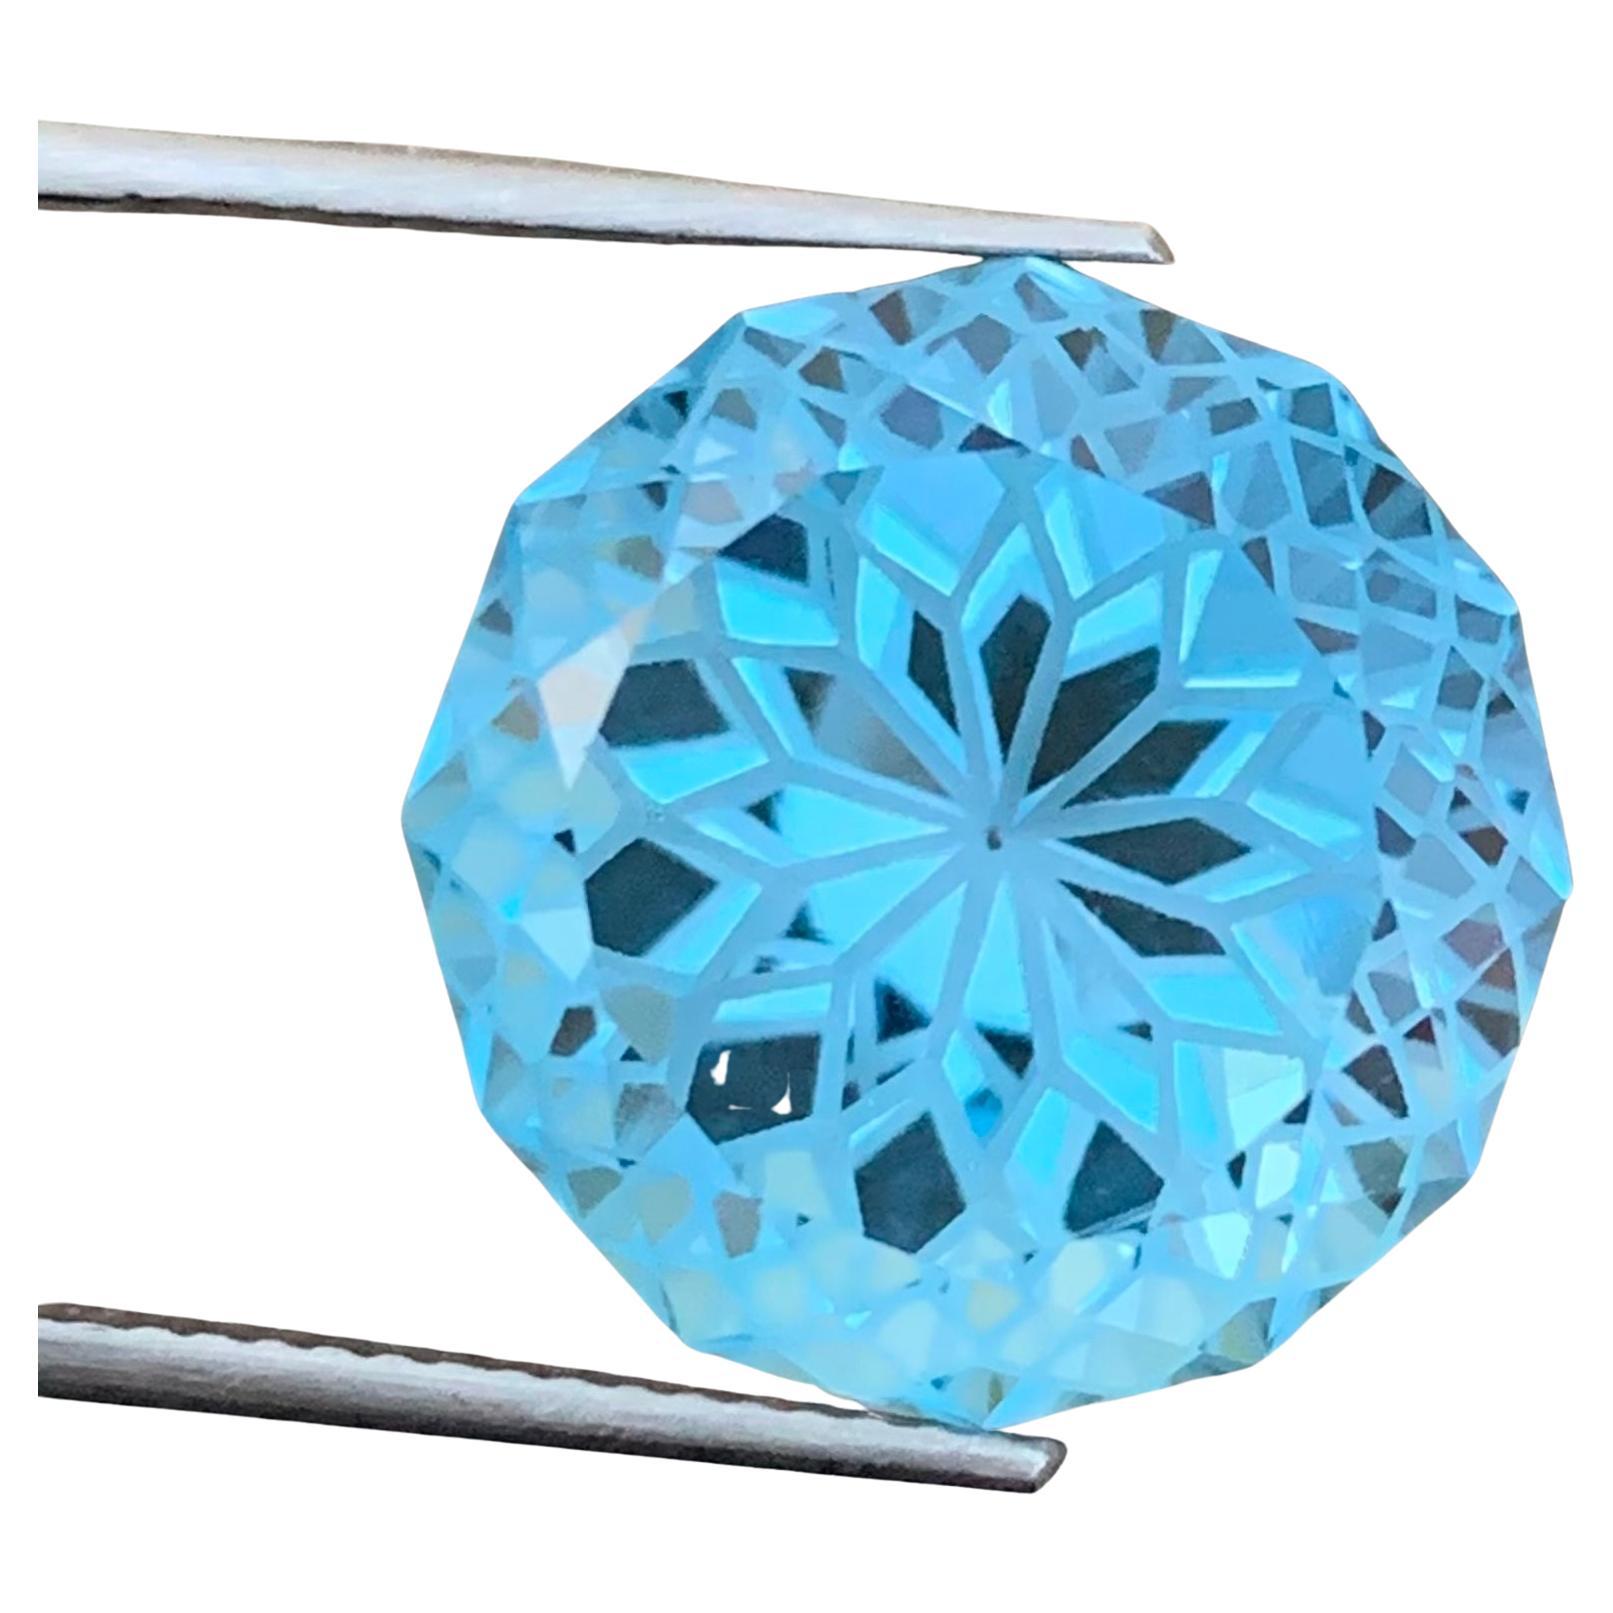 Captivating 19.65 Carats of Round Flower Cut Blue Topaz Gemstone Jewelry Making For Sale